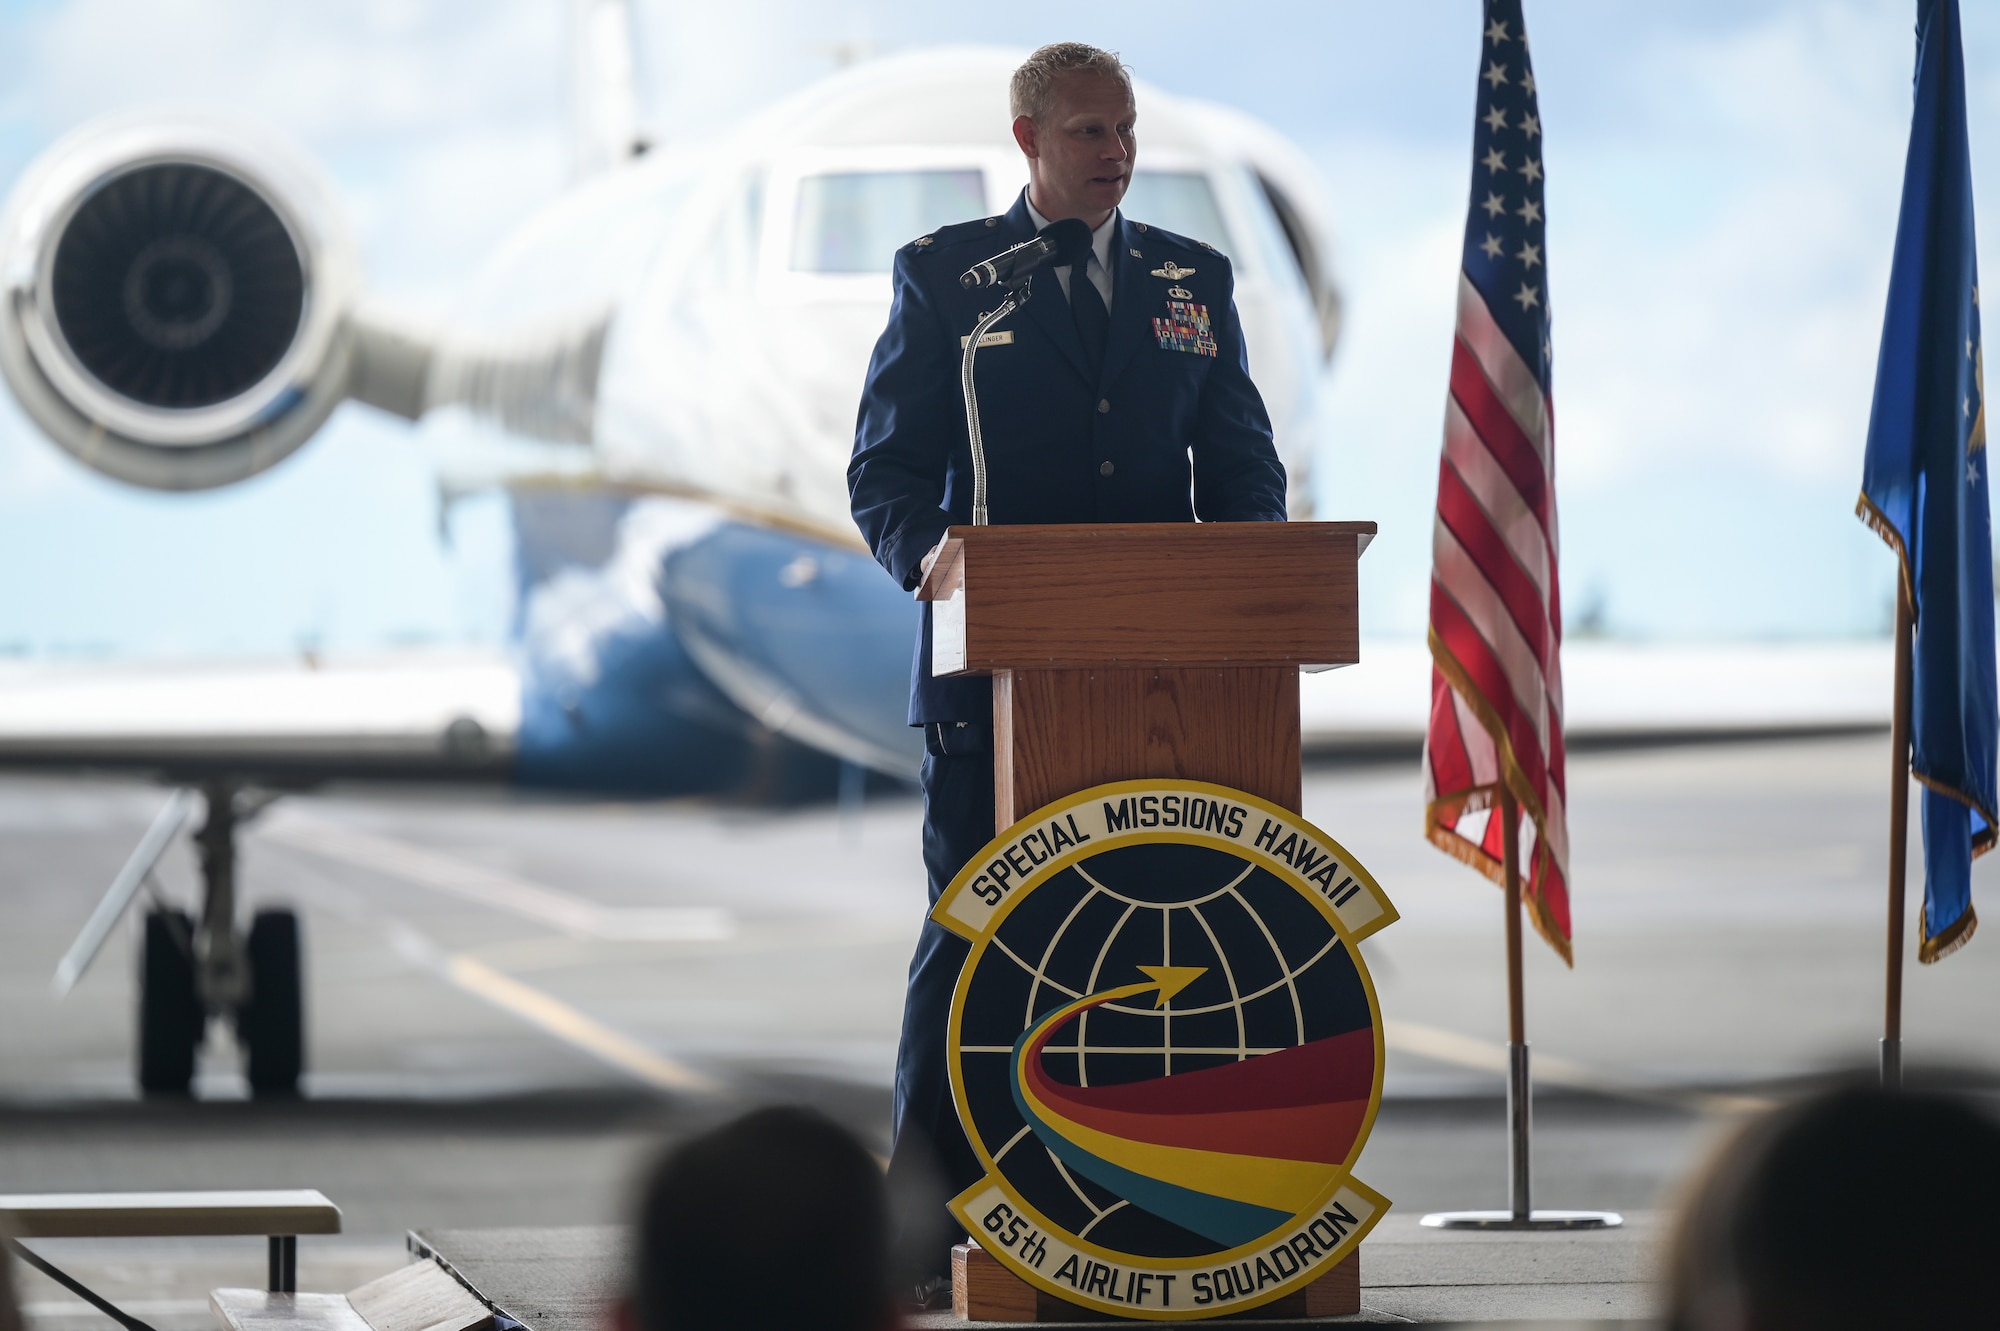 Lt. Col. Daniel Hellinger, 65th Airlift Squadron commander, gives a speech during a change of command ceremony at Joint Base Pearl Harbor-Hickam, Hawaii, June 24, 2022. Hellinger previously served as the 15th Wing Chief of Safety. (U.S. Air Force photo by Staff Sgt. Alan Ricker)